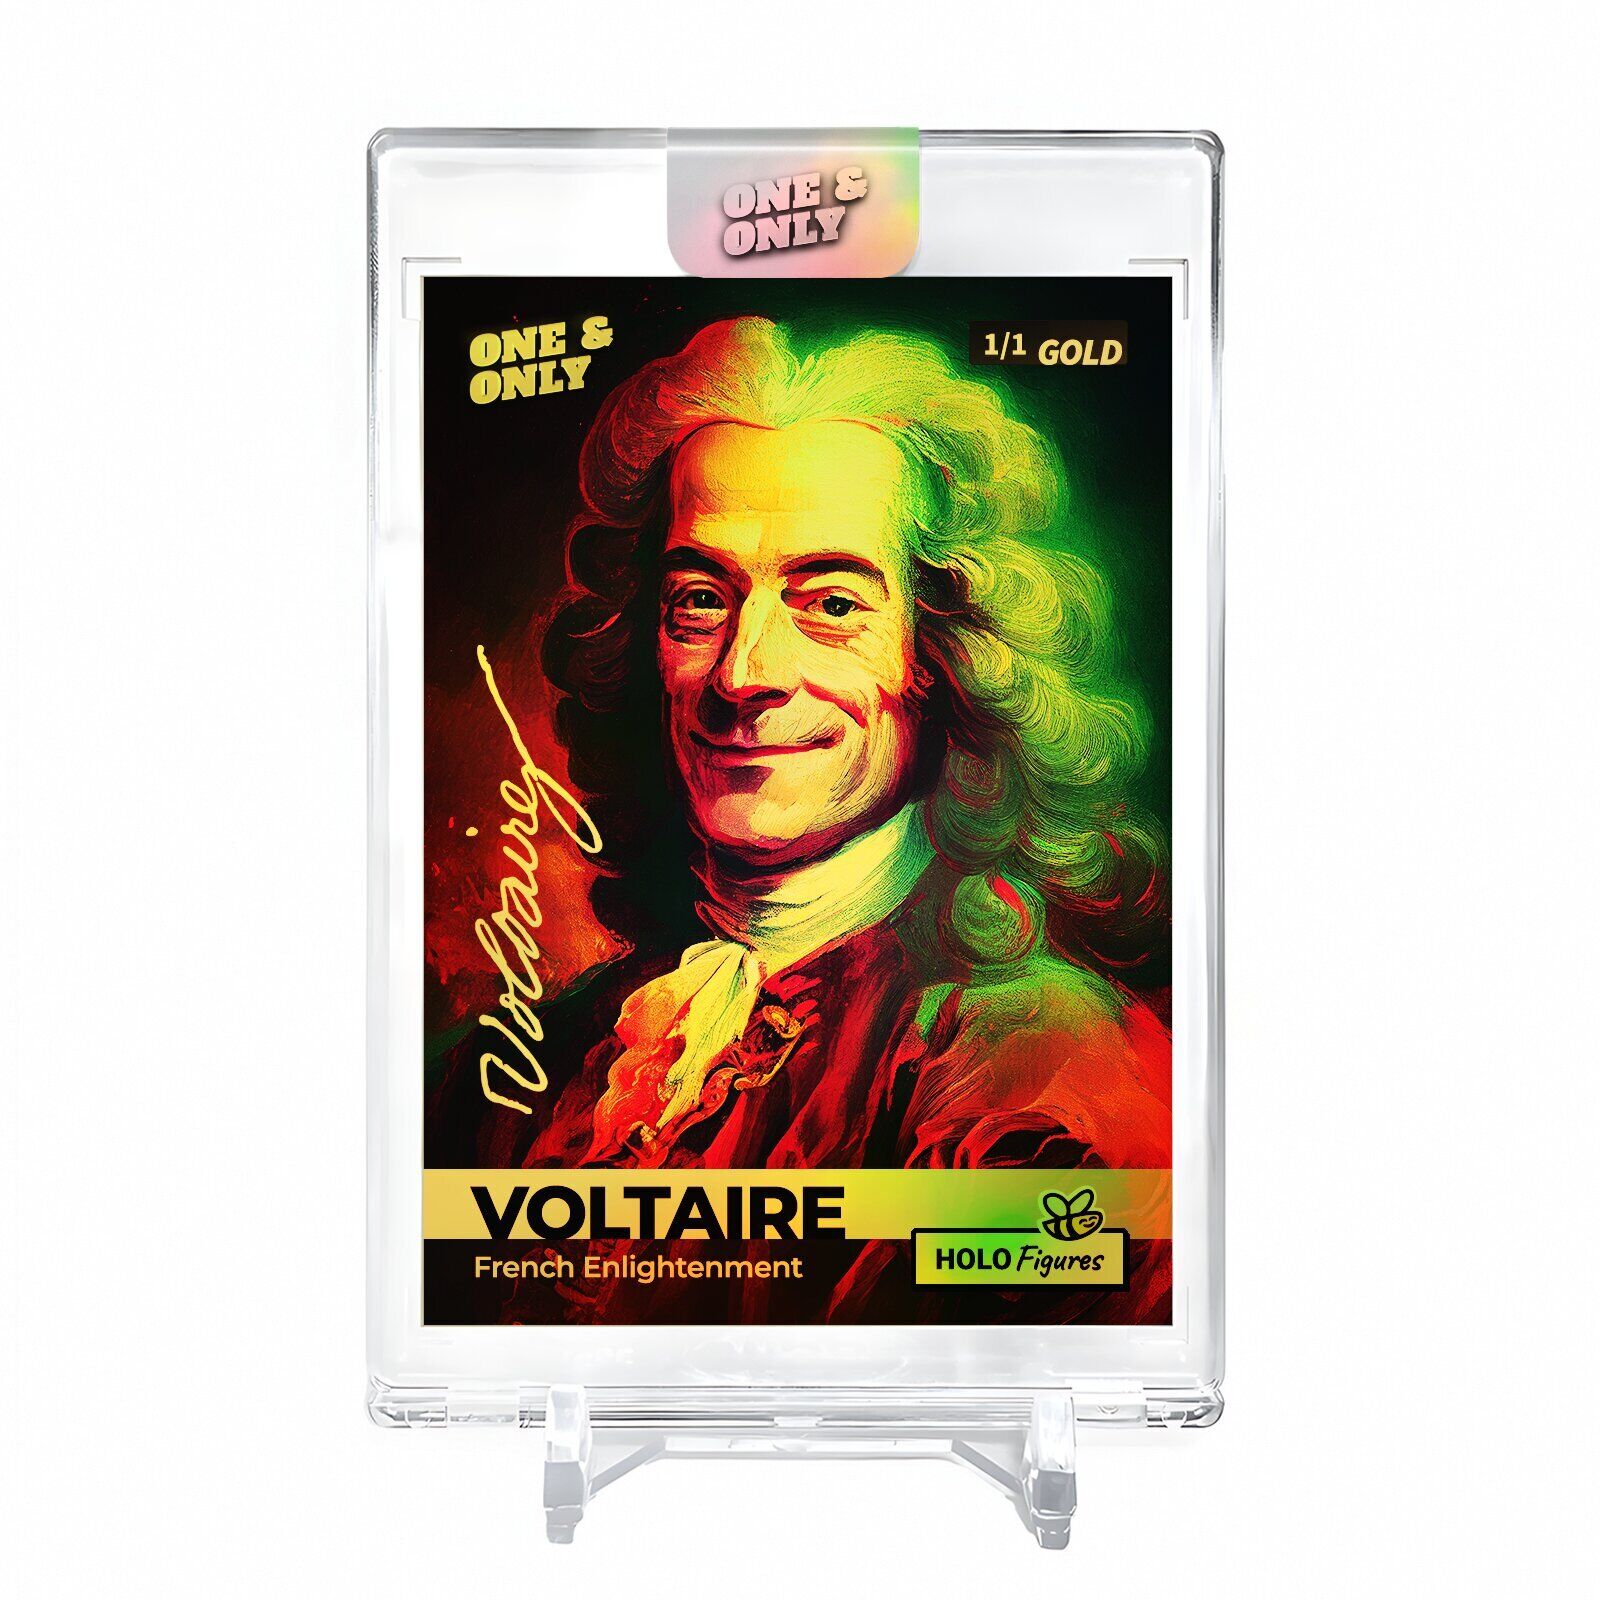 VOLTAIRE Art Trading Card #VLFE *One & Only* Encased Gold 1/1